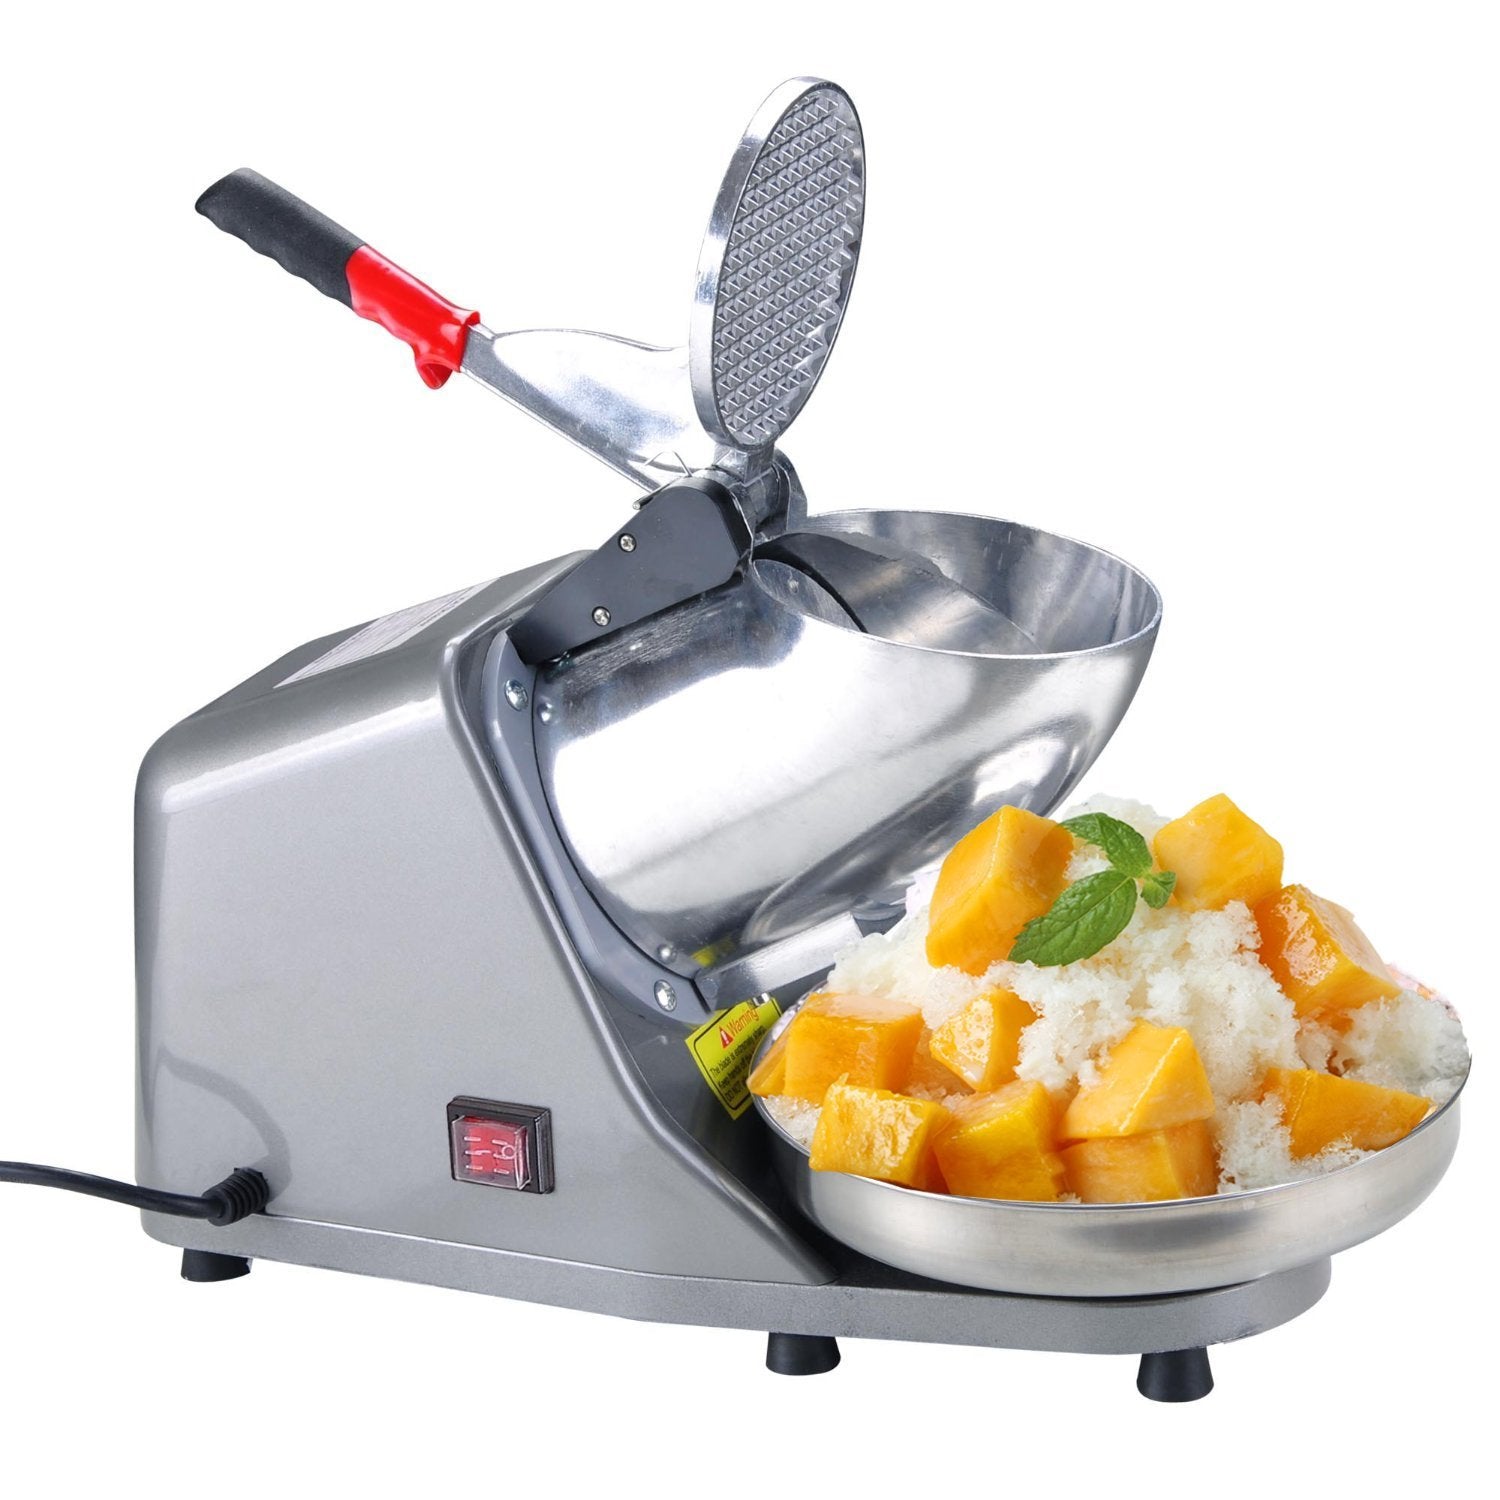 300W Electric Ice Crusher Shaver StainlessSteel Blade Cone Maker Kitchen machine - SILBERSHELL